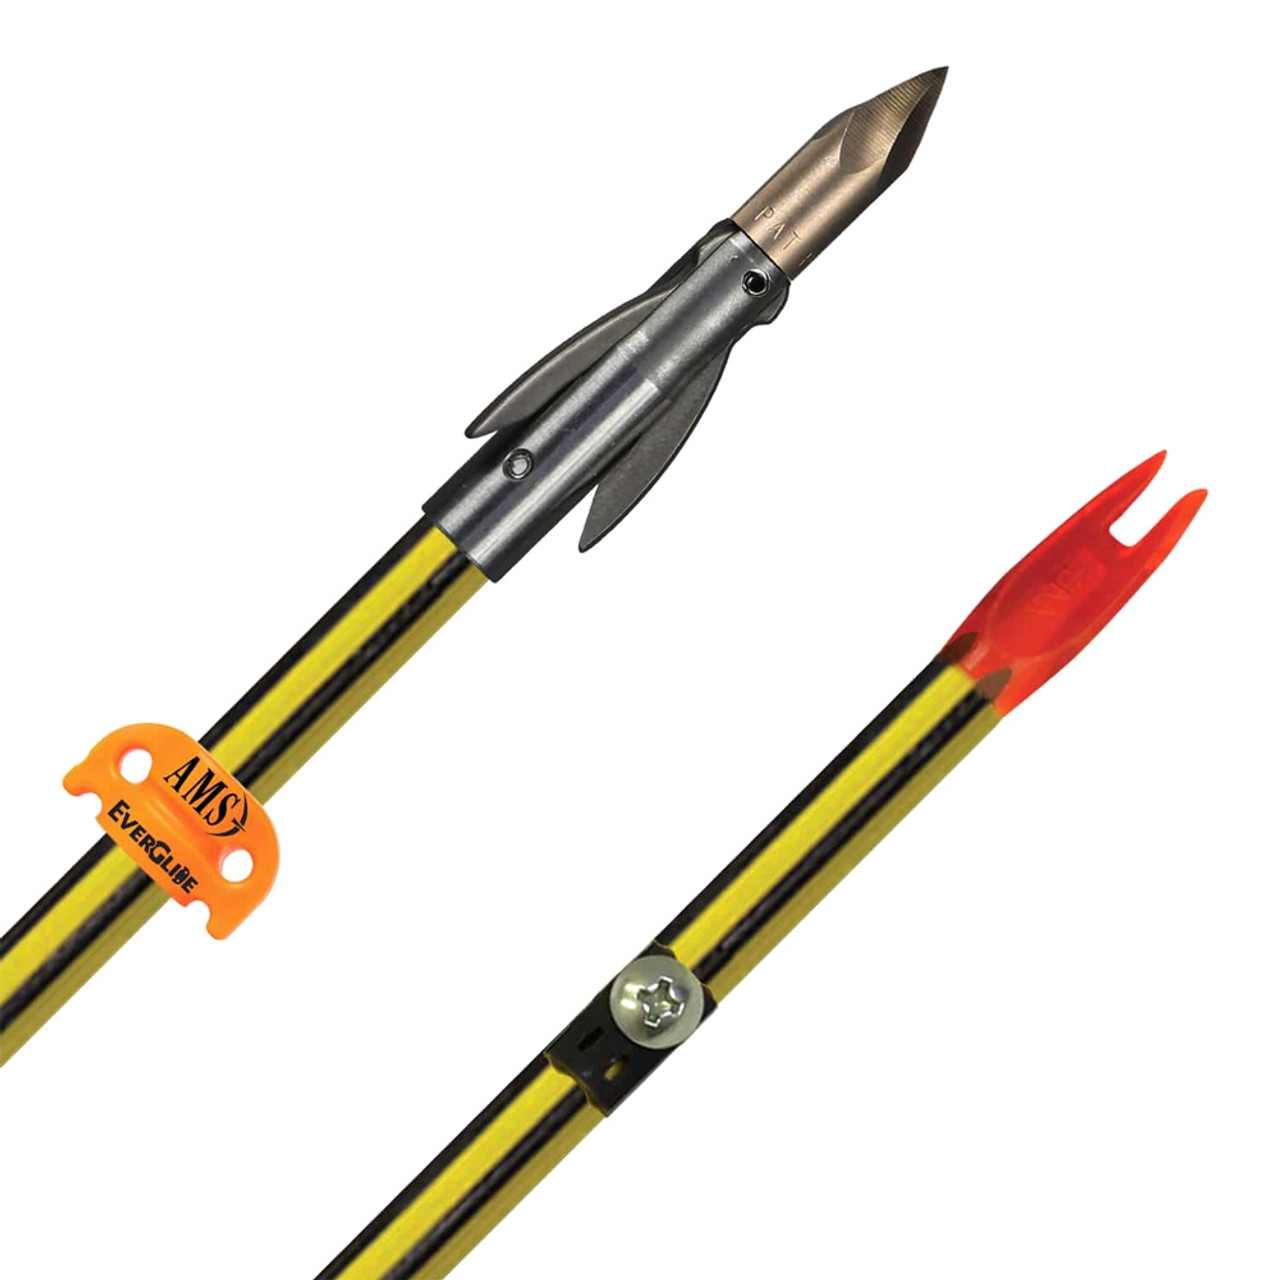 AMS BOWFISHING AnKor FX Point Carbon Spined Arrow A306